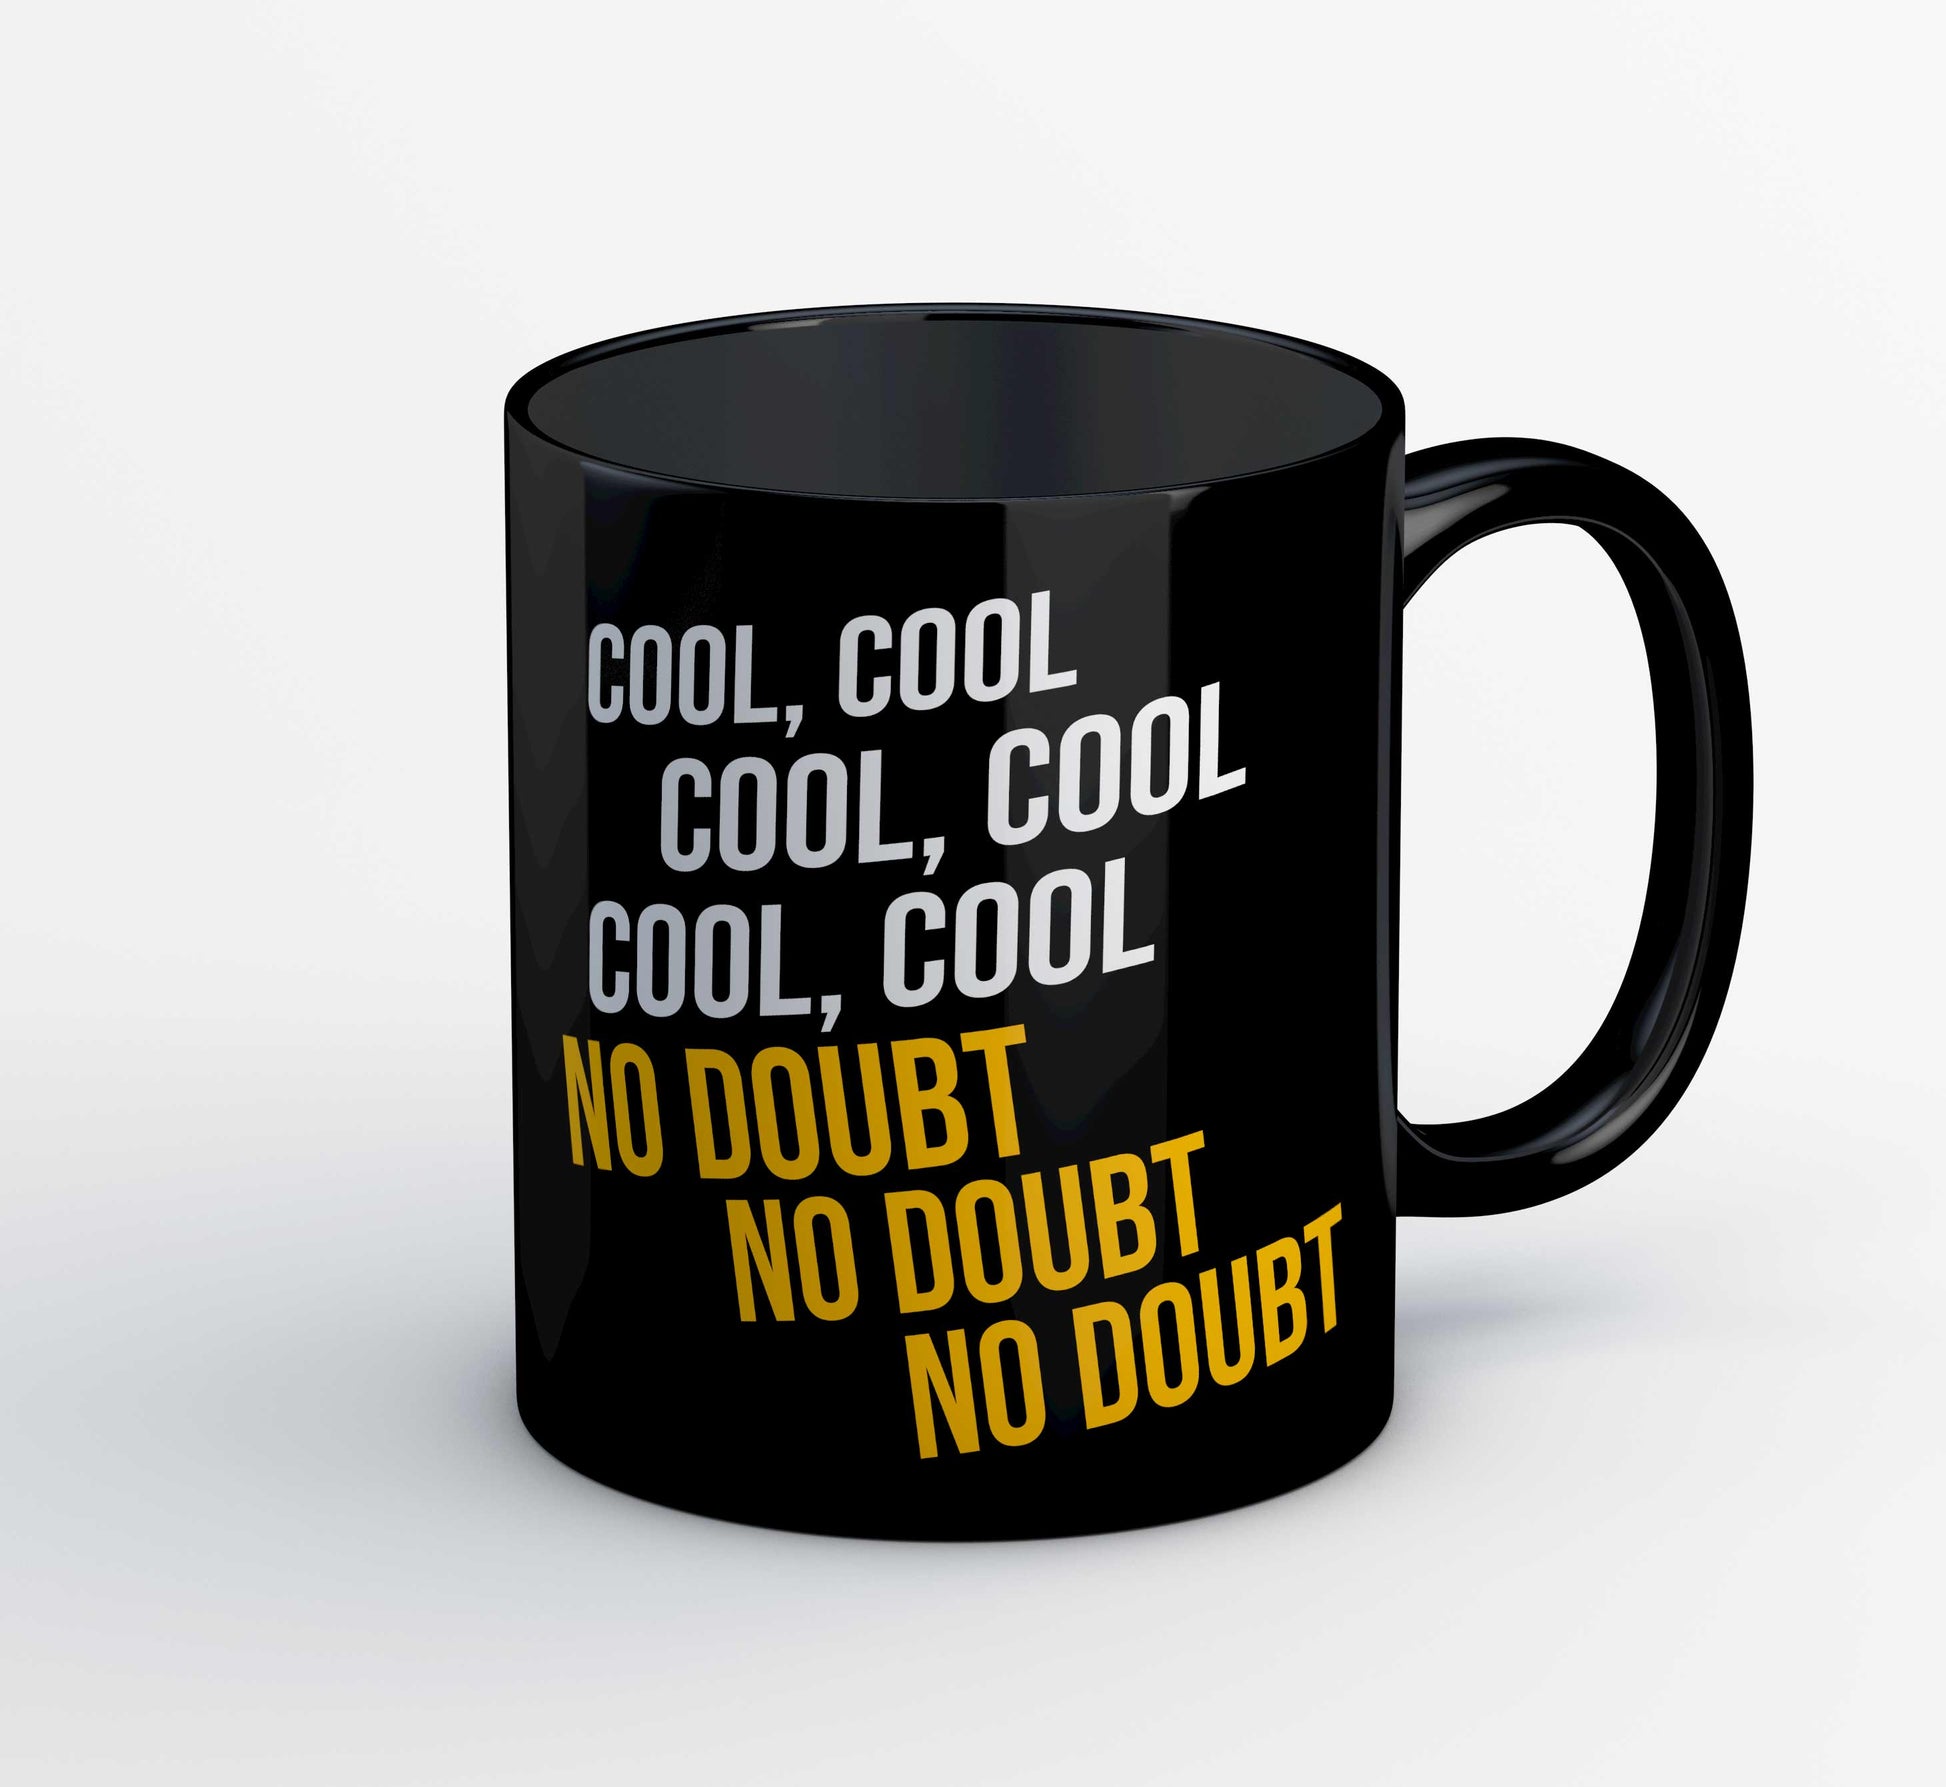 brooklyn nine-nine cool cool cool no doubt no doubt no doubt mug coffee ceramic buy online usa united states of america the banyan tee tbt men women girls boys unisex  detective jake peralta terry charles boyle gina linetti andy samberg merchandise clothing acceessories